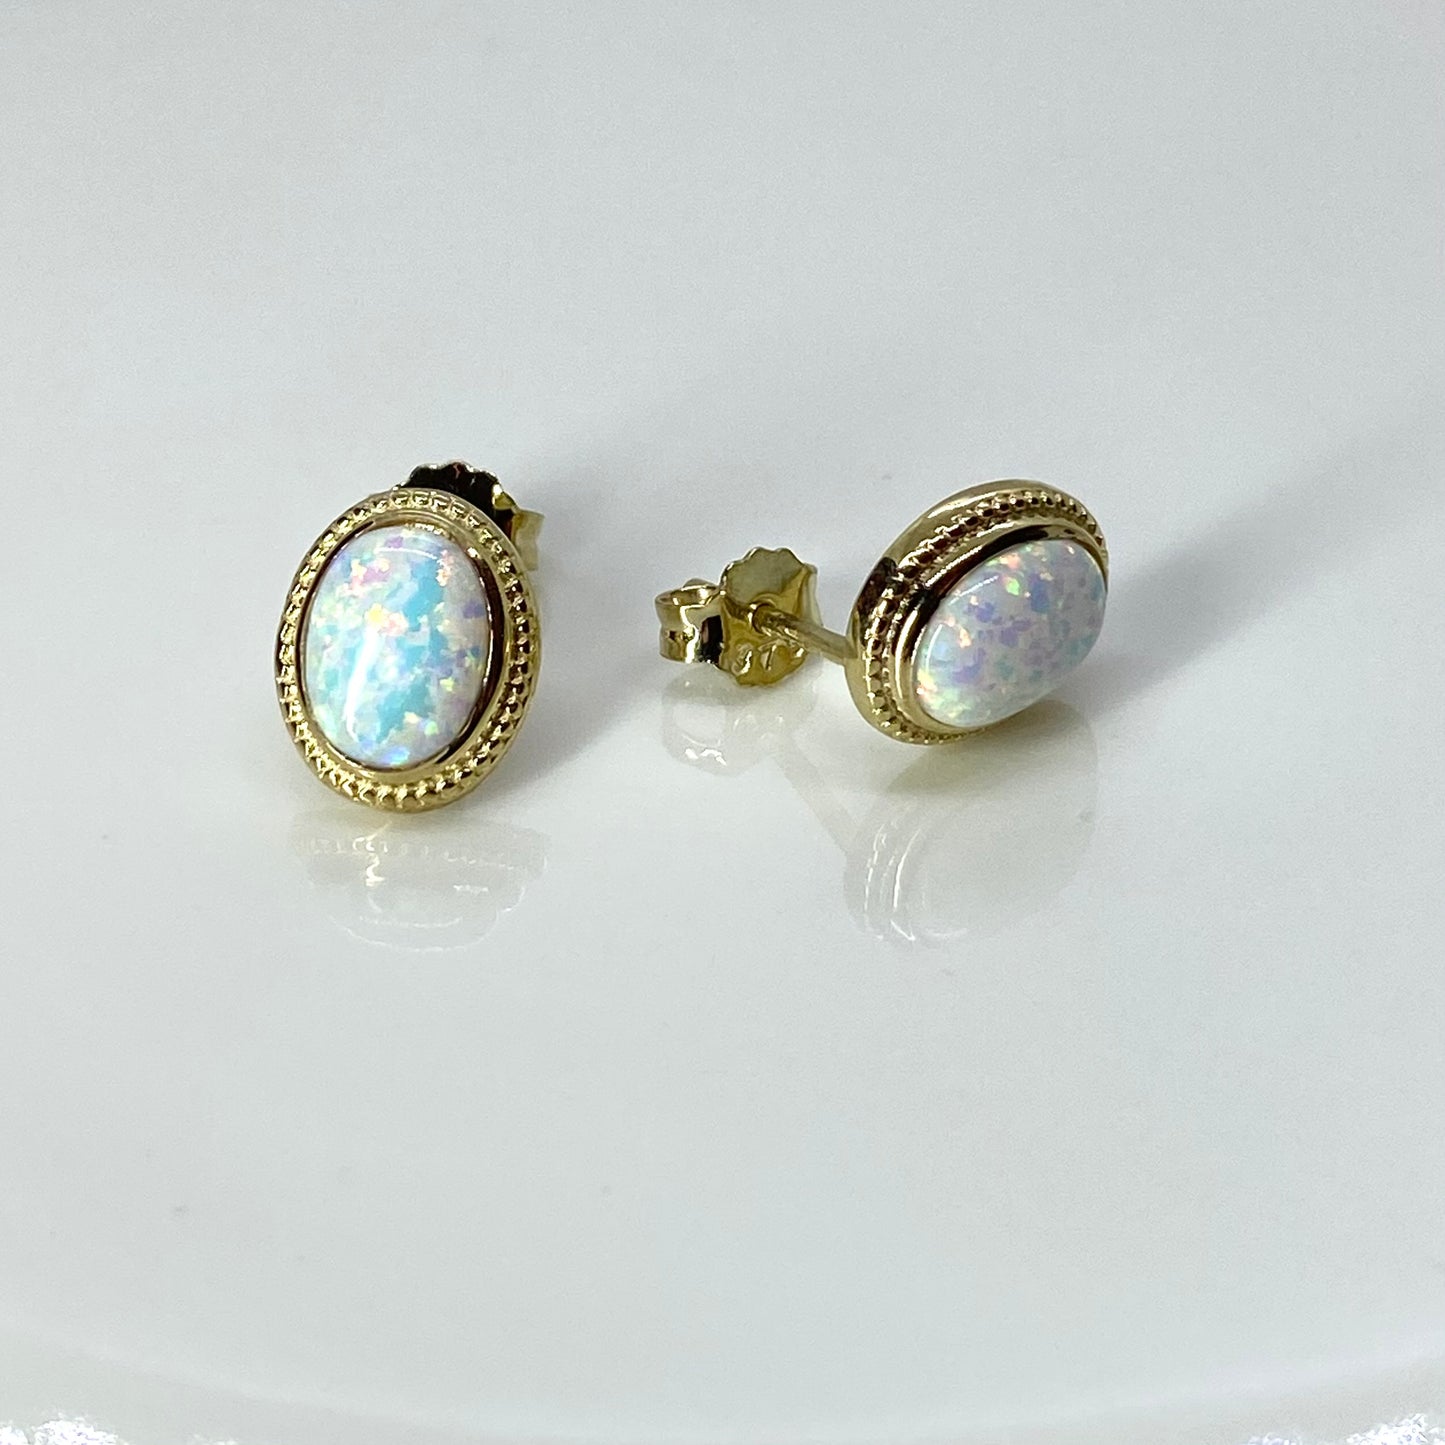 9ct Gold Oval Opalique Stud Earrings with Beaded Edge - John Ross Jewellers